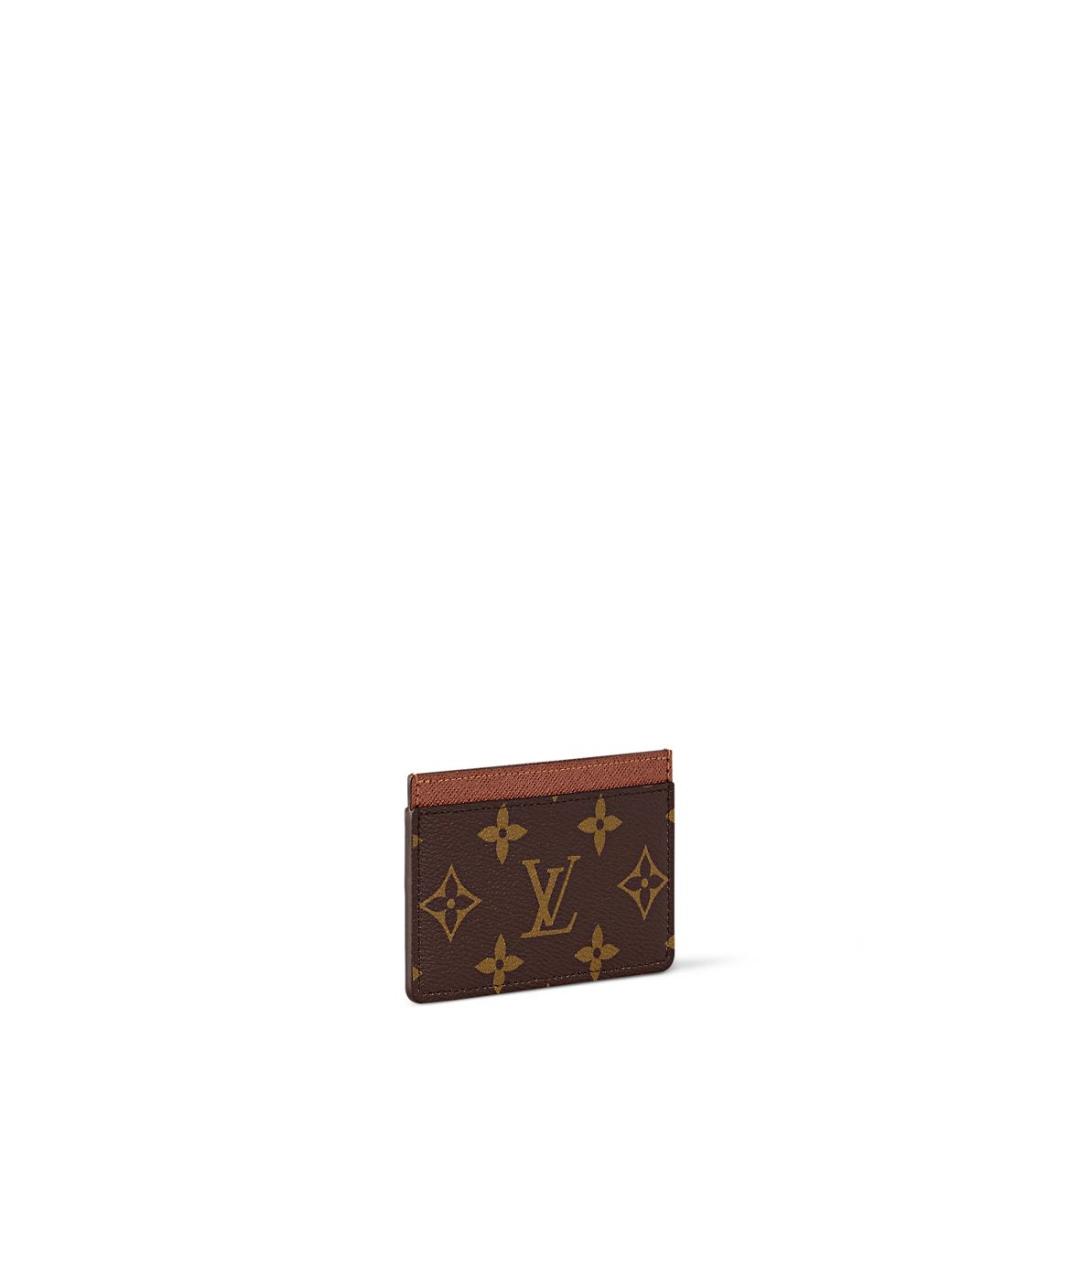 LOUIS VUITTON PRE-OWNED Коричневый кардхолдер, фото 8